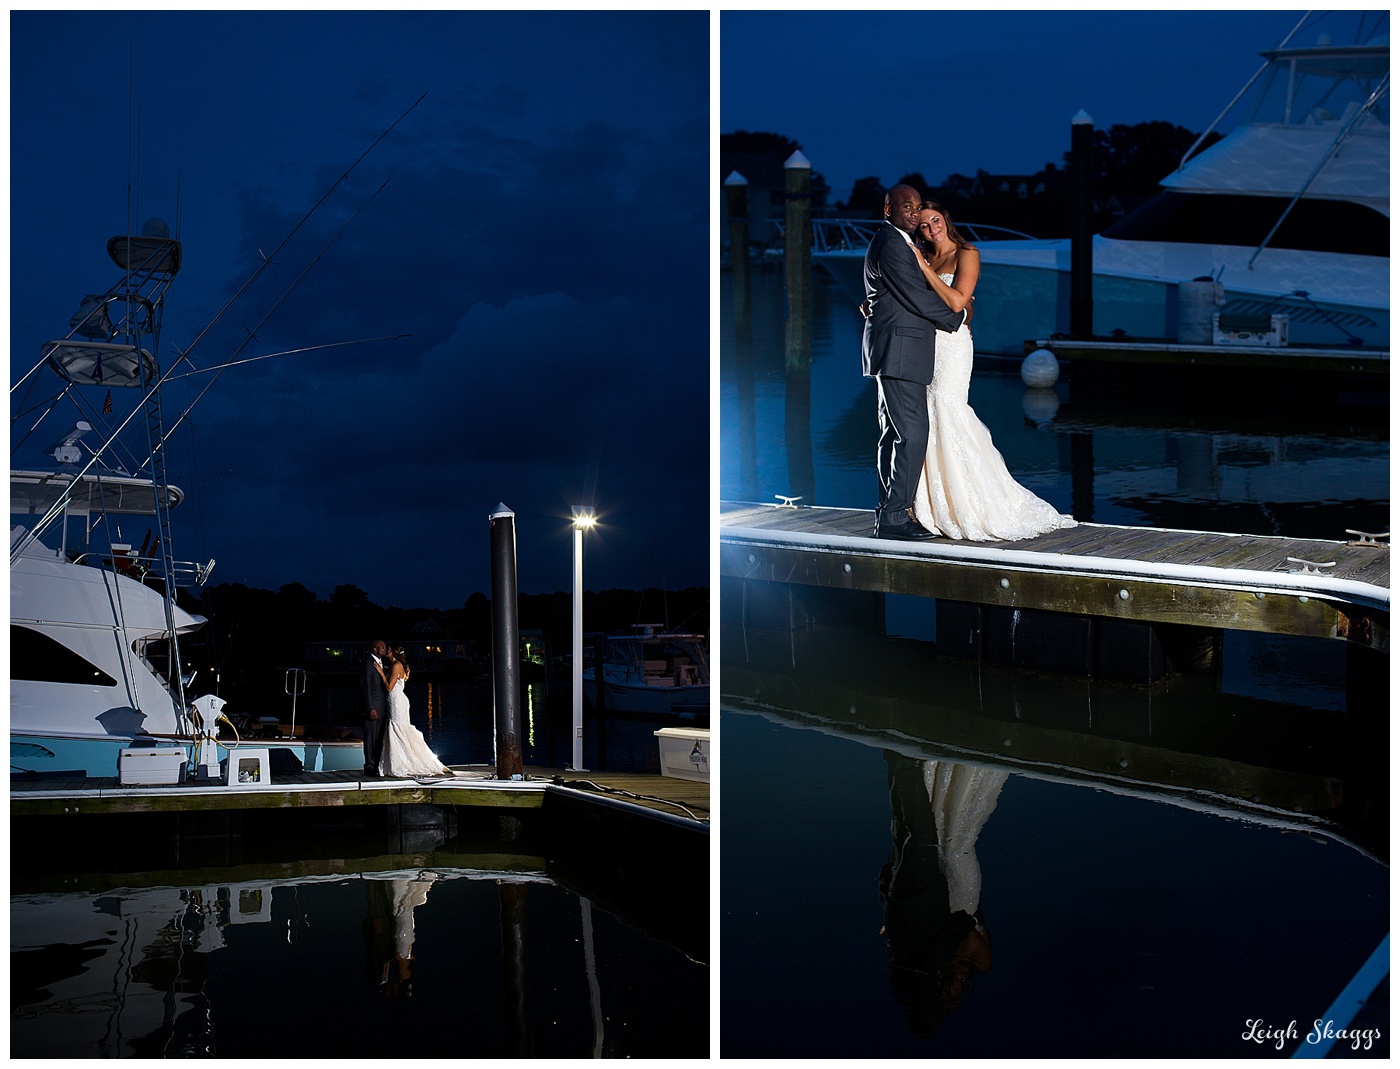 Jessica & Oliver are Married!!  A sneak peek of their Water Table wedding!  